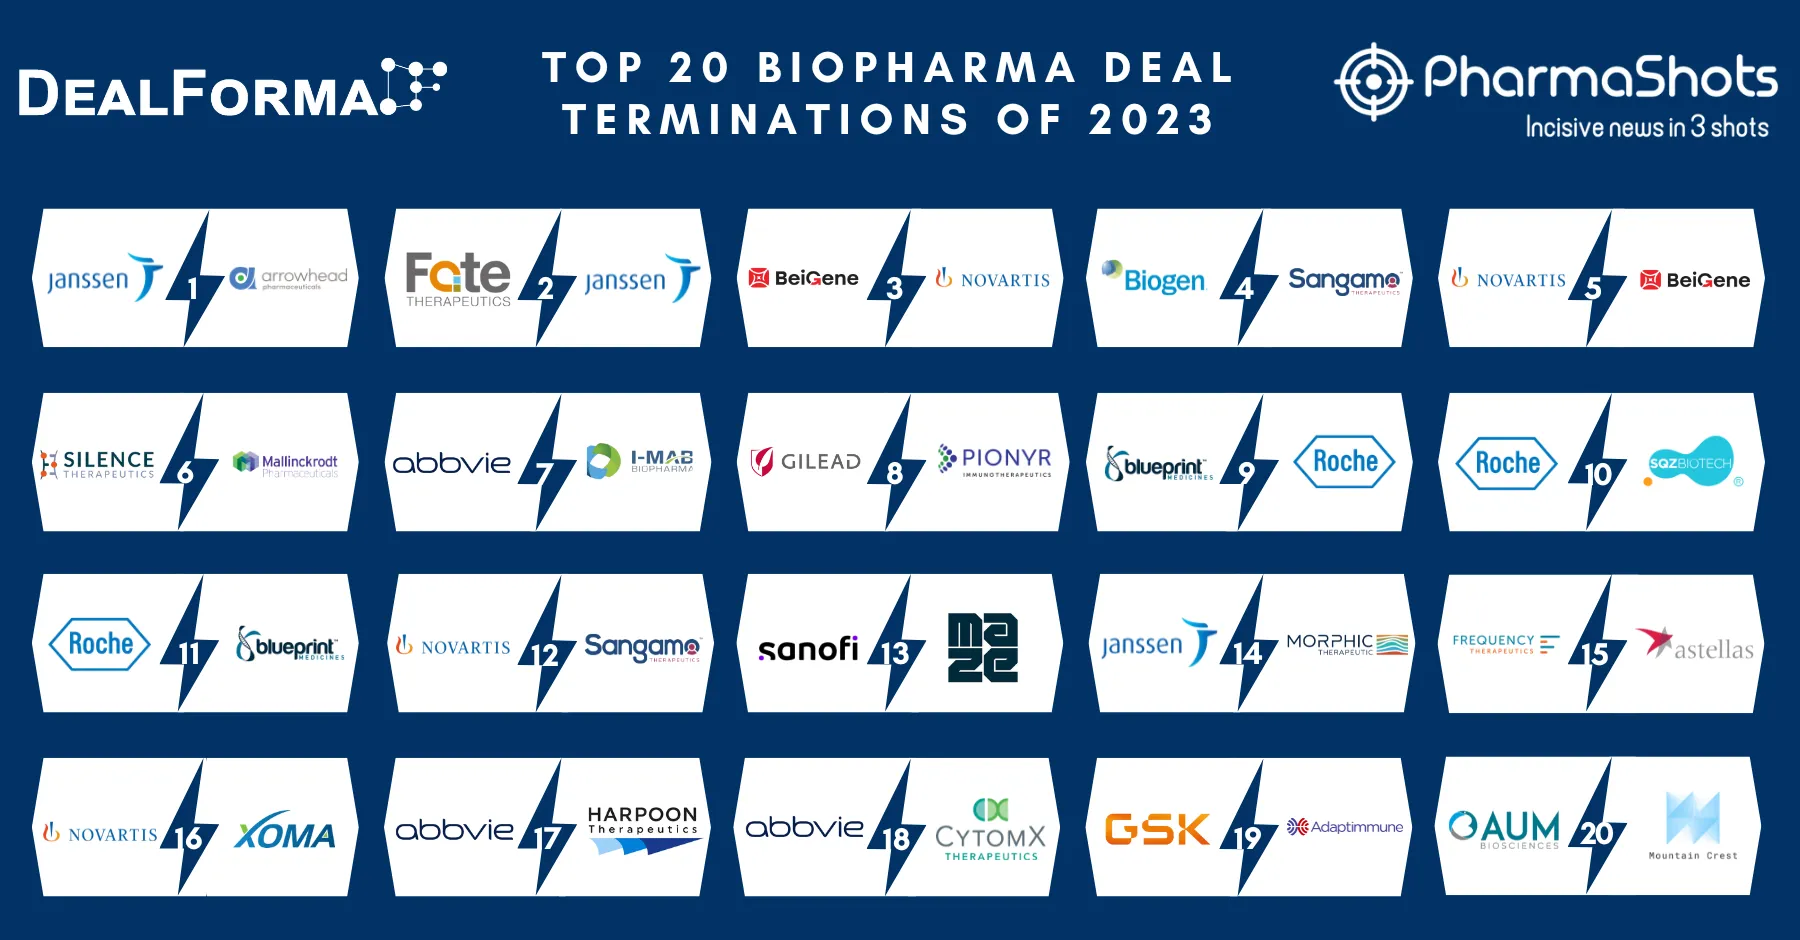 Top 20 Biopharma Deal Terminations of 2023 Based on Total Deal Value